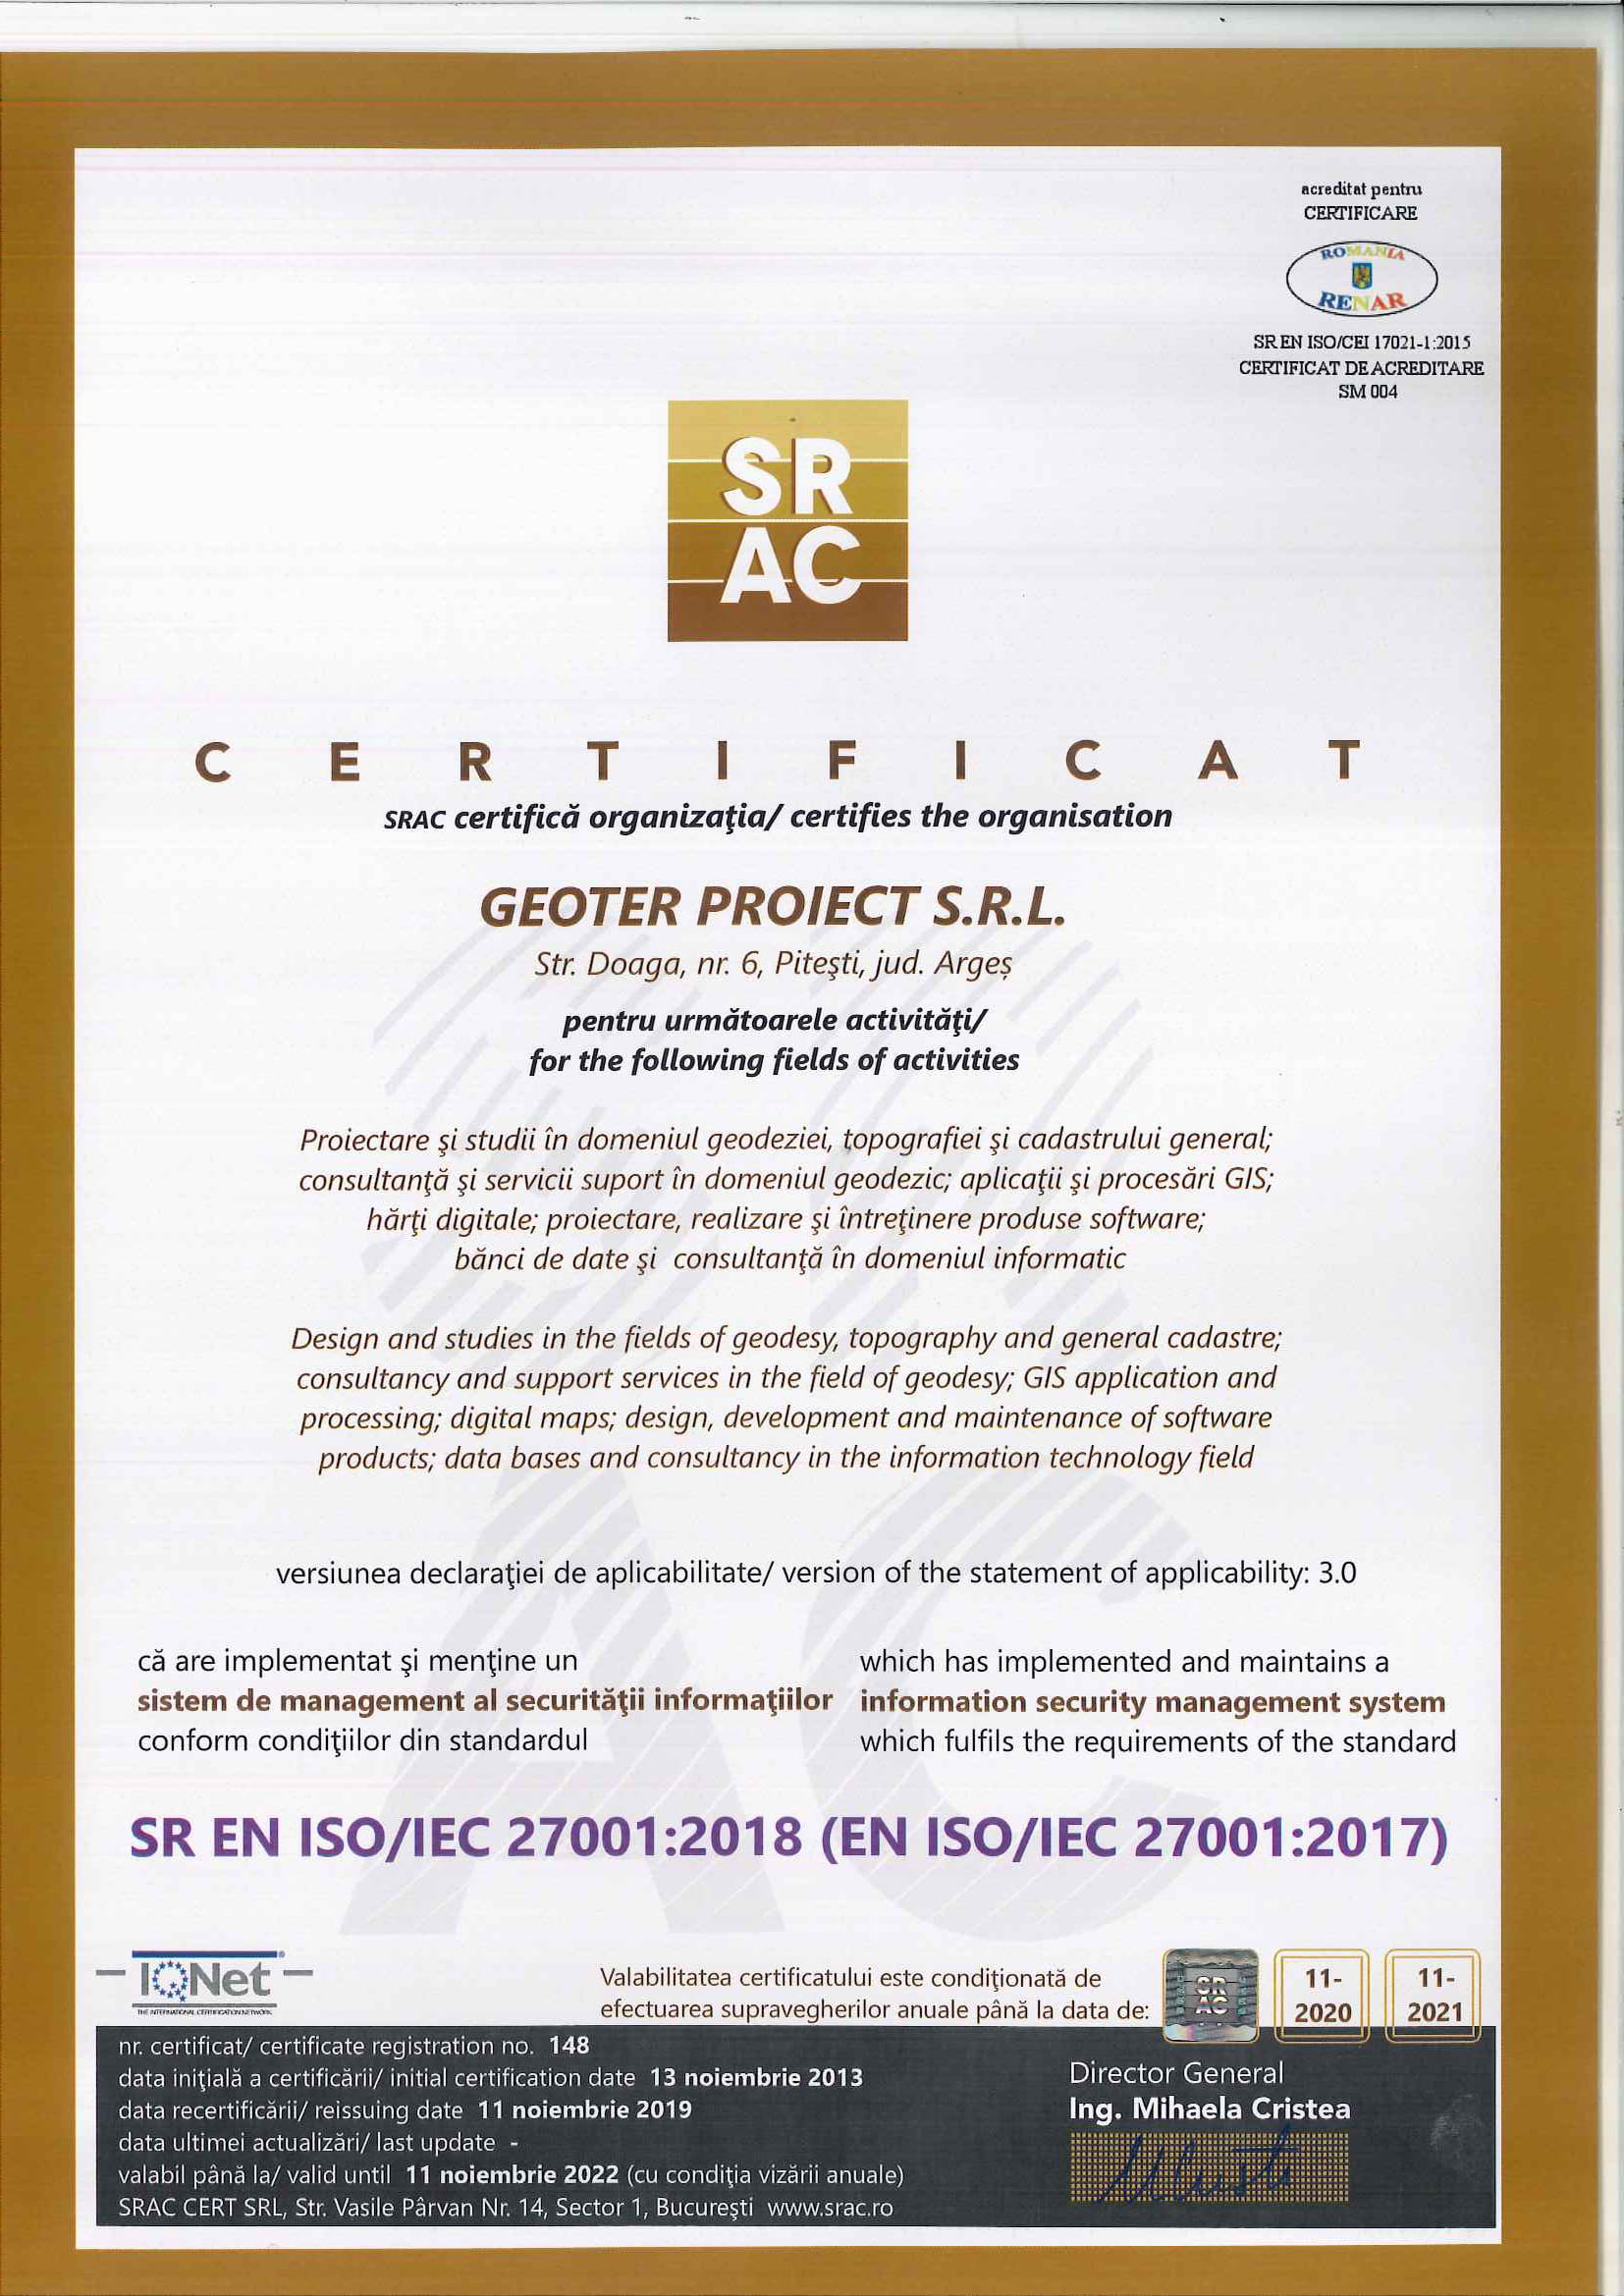 Geoter Proiect